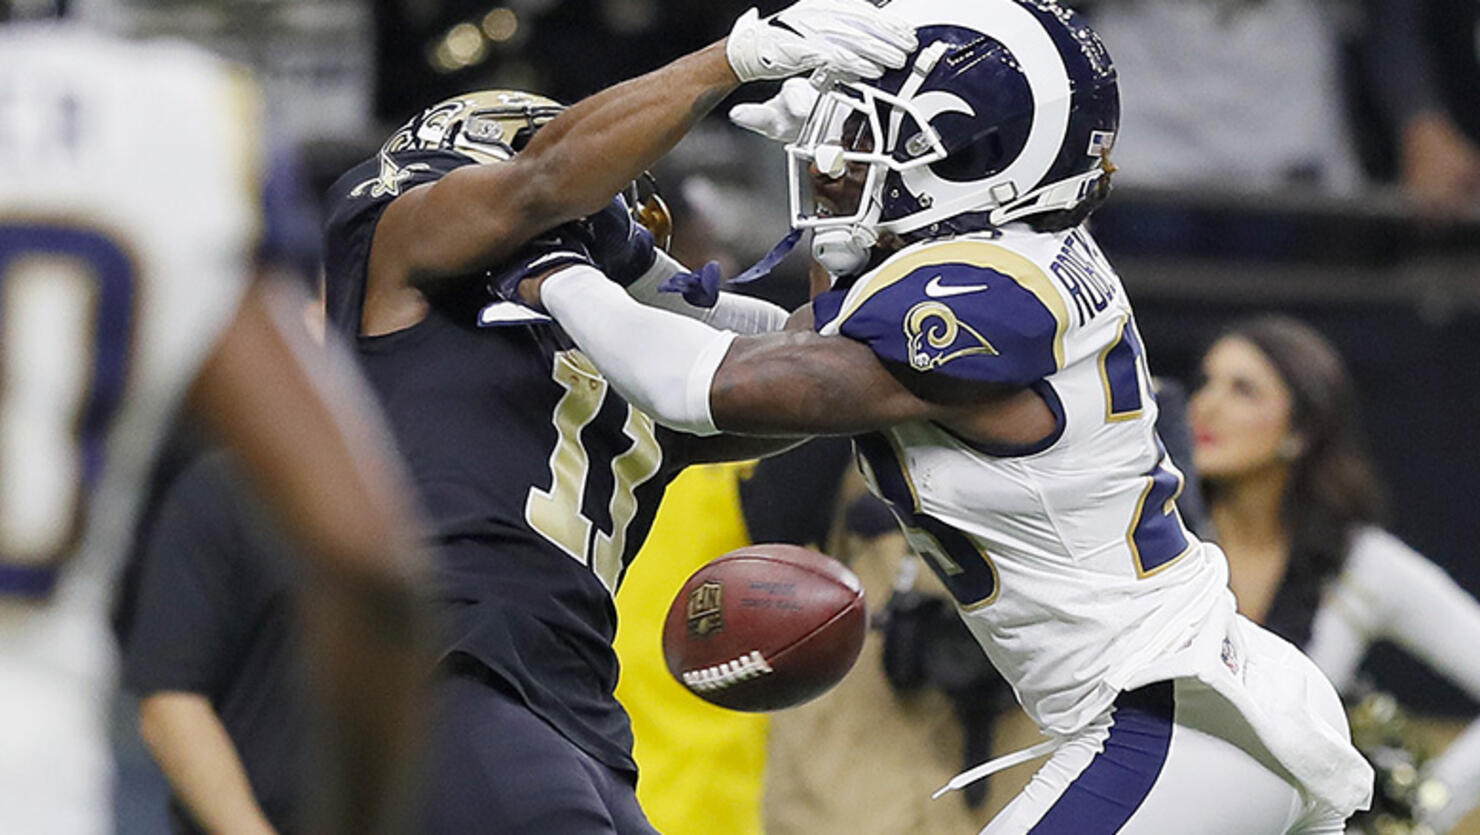 Tommylee Lewis #11 of the New Orleans Saints drops a pass broken up by Nickell Robey-Coleman #23 of the Los Angeles Rams during the fourth quarter in the NFC Championship game at the Mercedes-Benz Superdome on January 20, 2019 in New Orleans, Louisiana